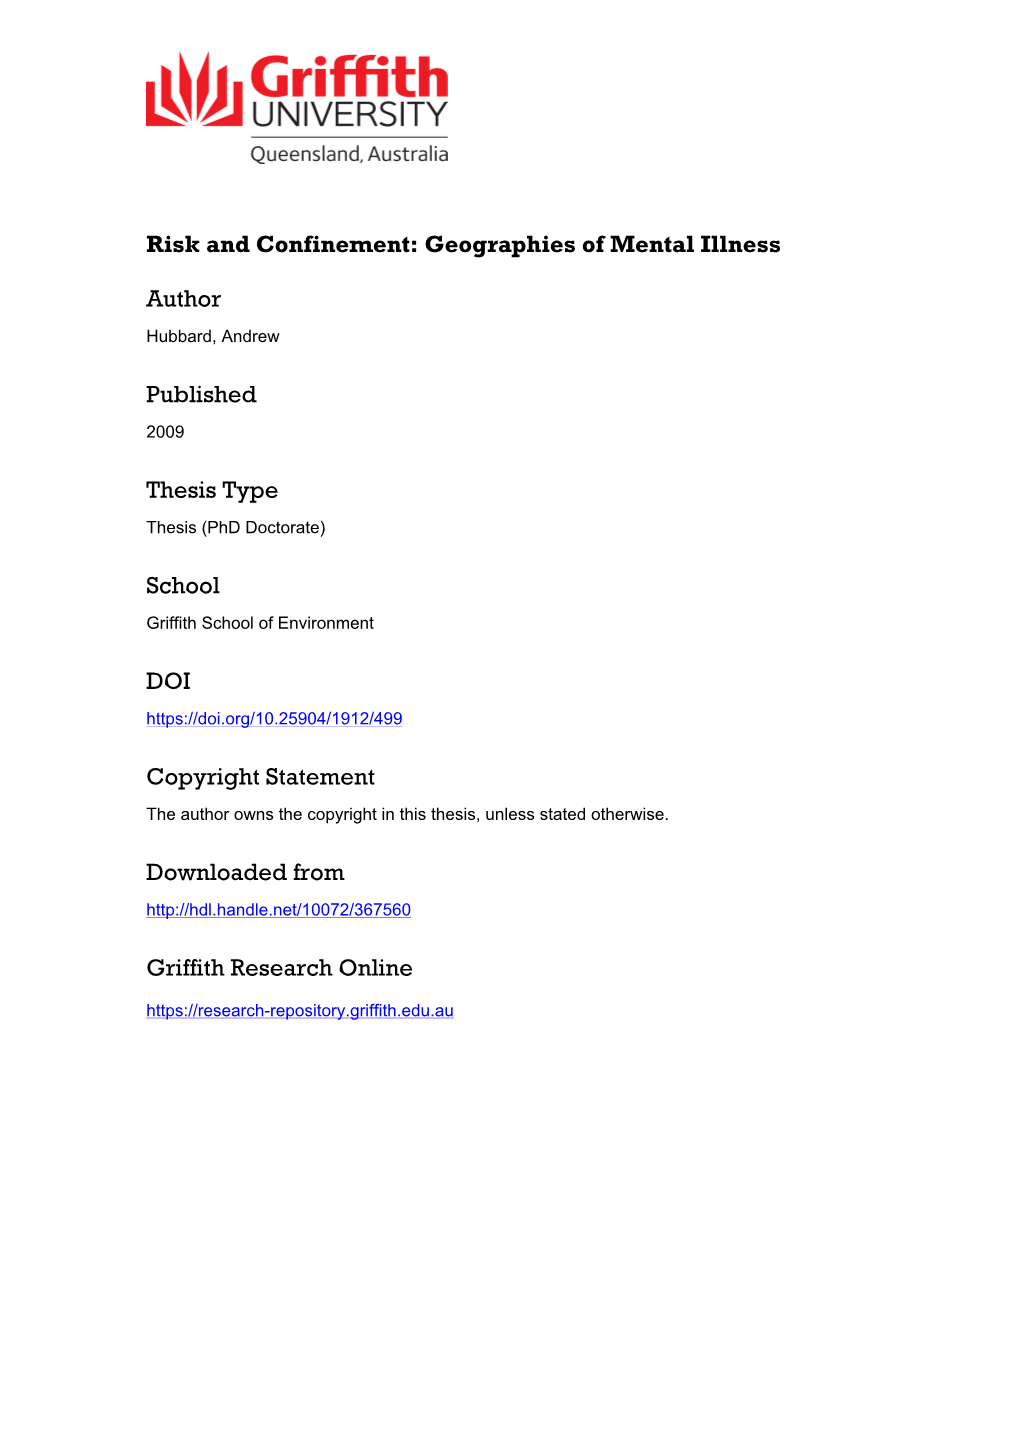 Risk and Confinement: Geographies of Mental Illness